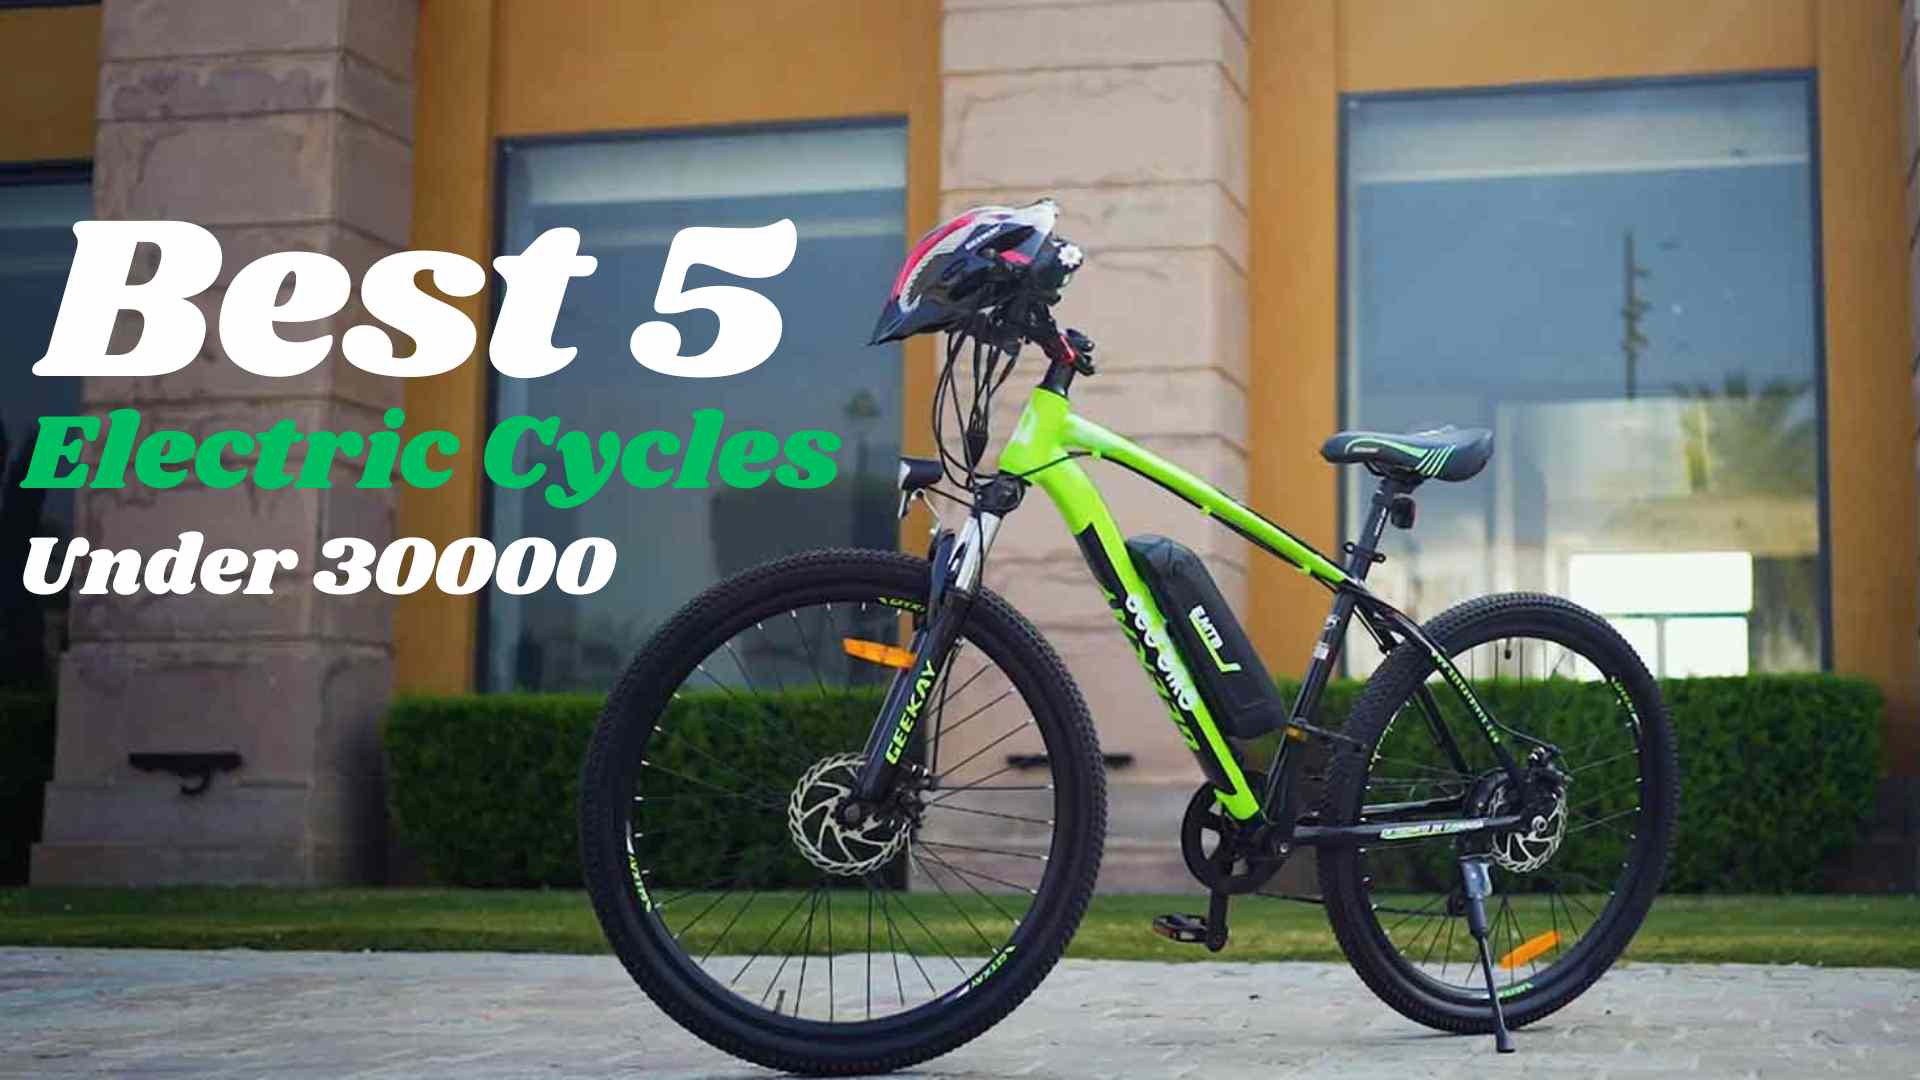 Best 5 Electric Cycles Under 30000